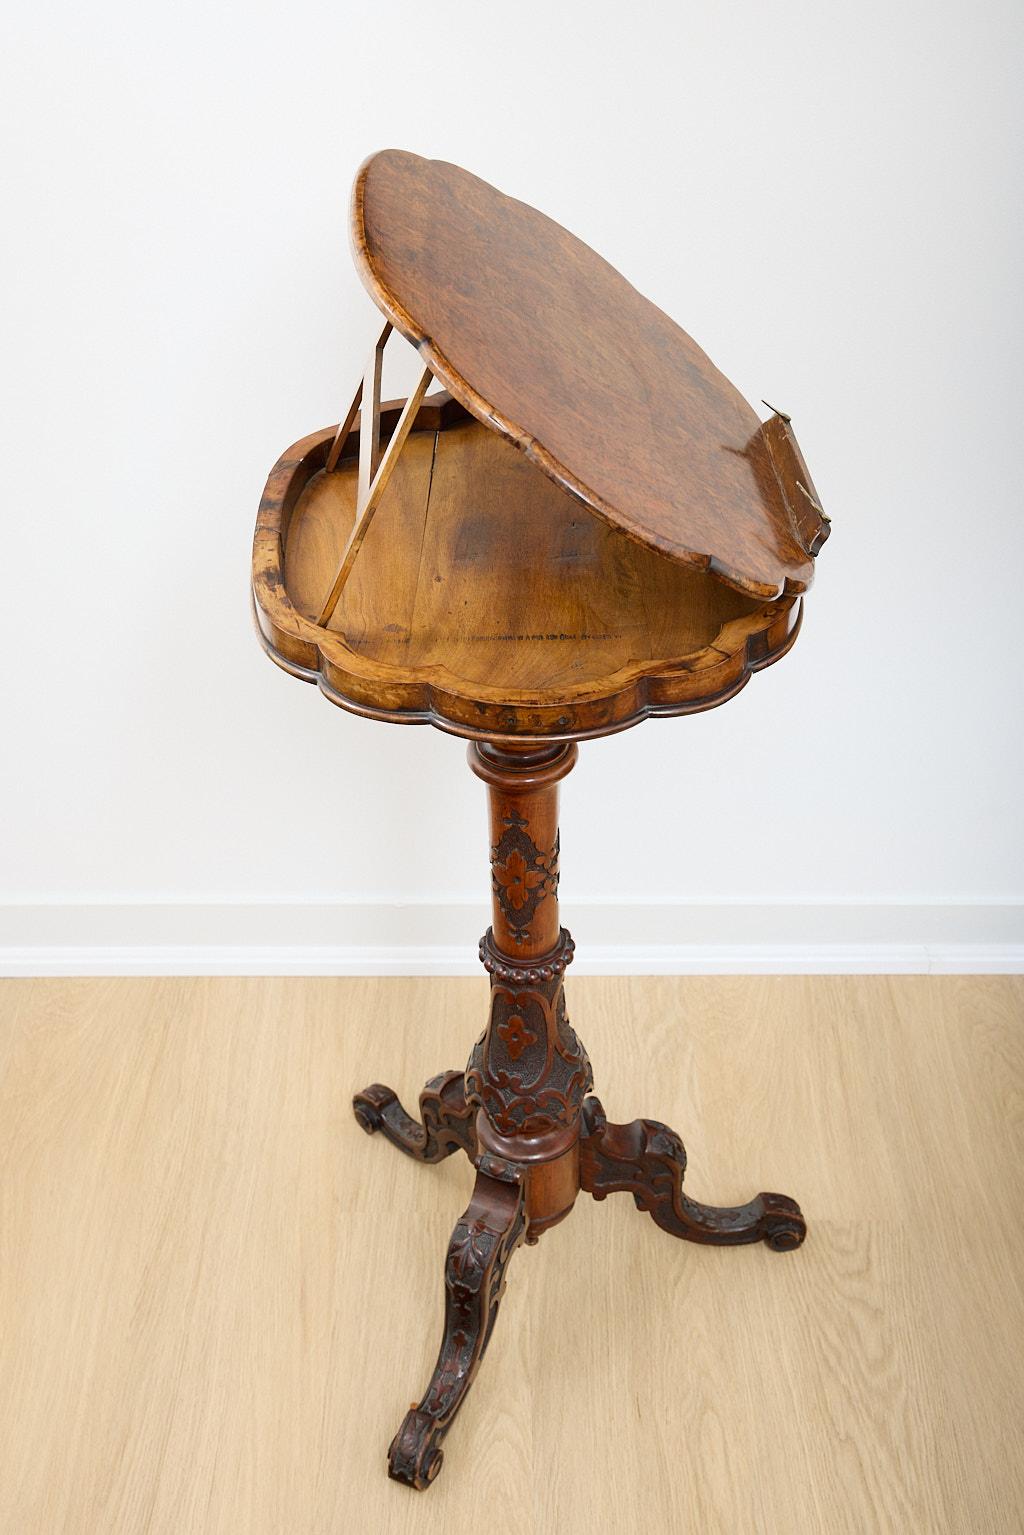 Petite Burled walnut bookstand. This lovely table has a scalloped oval surface in burled walnut. It is raised on a central carved wood post terminating in cabriole legs with scroll feet. Possibly Irish. 
This piece can be raised or lowered through